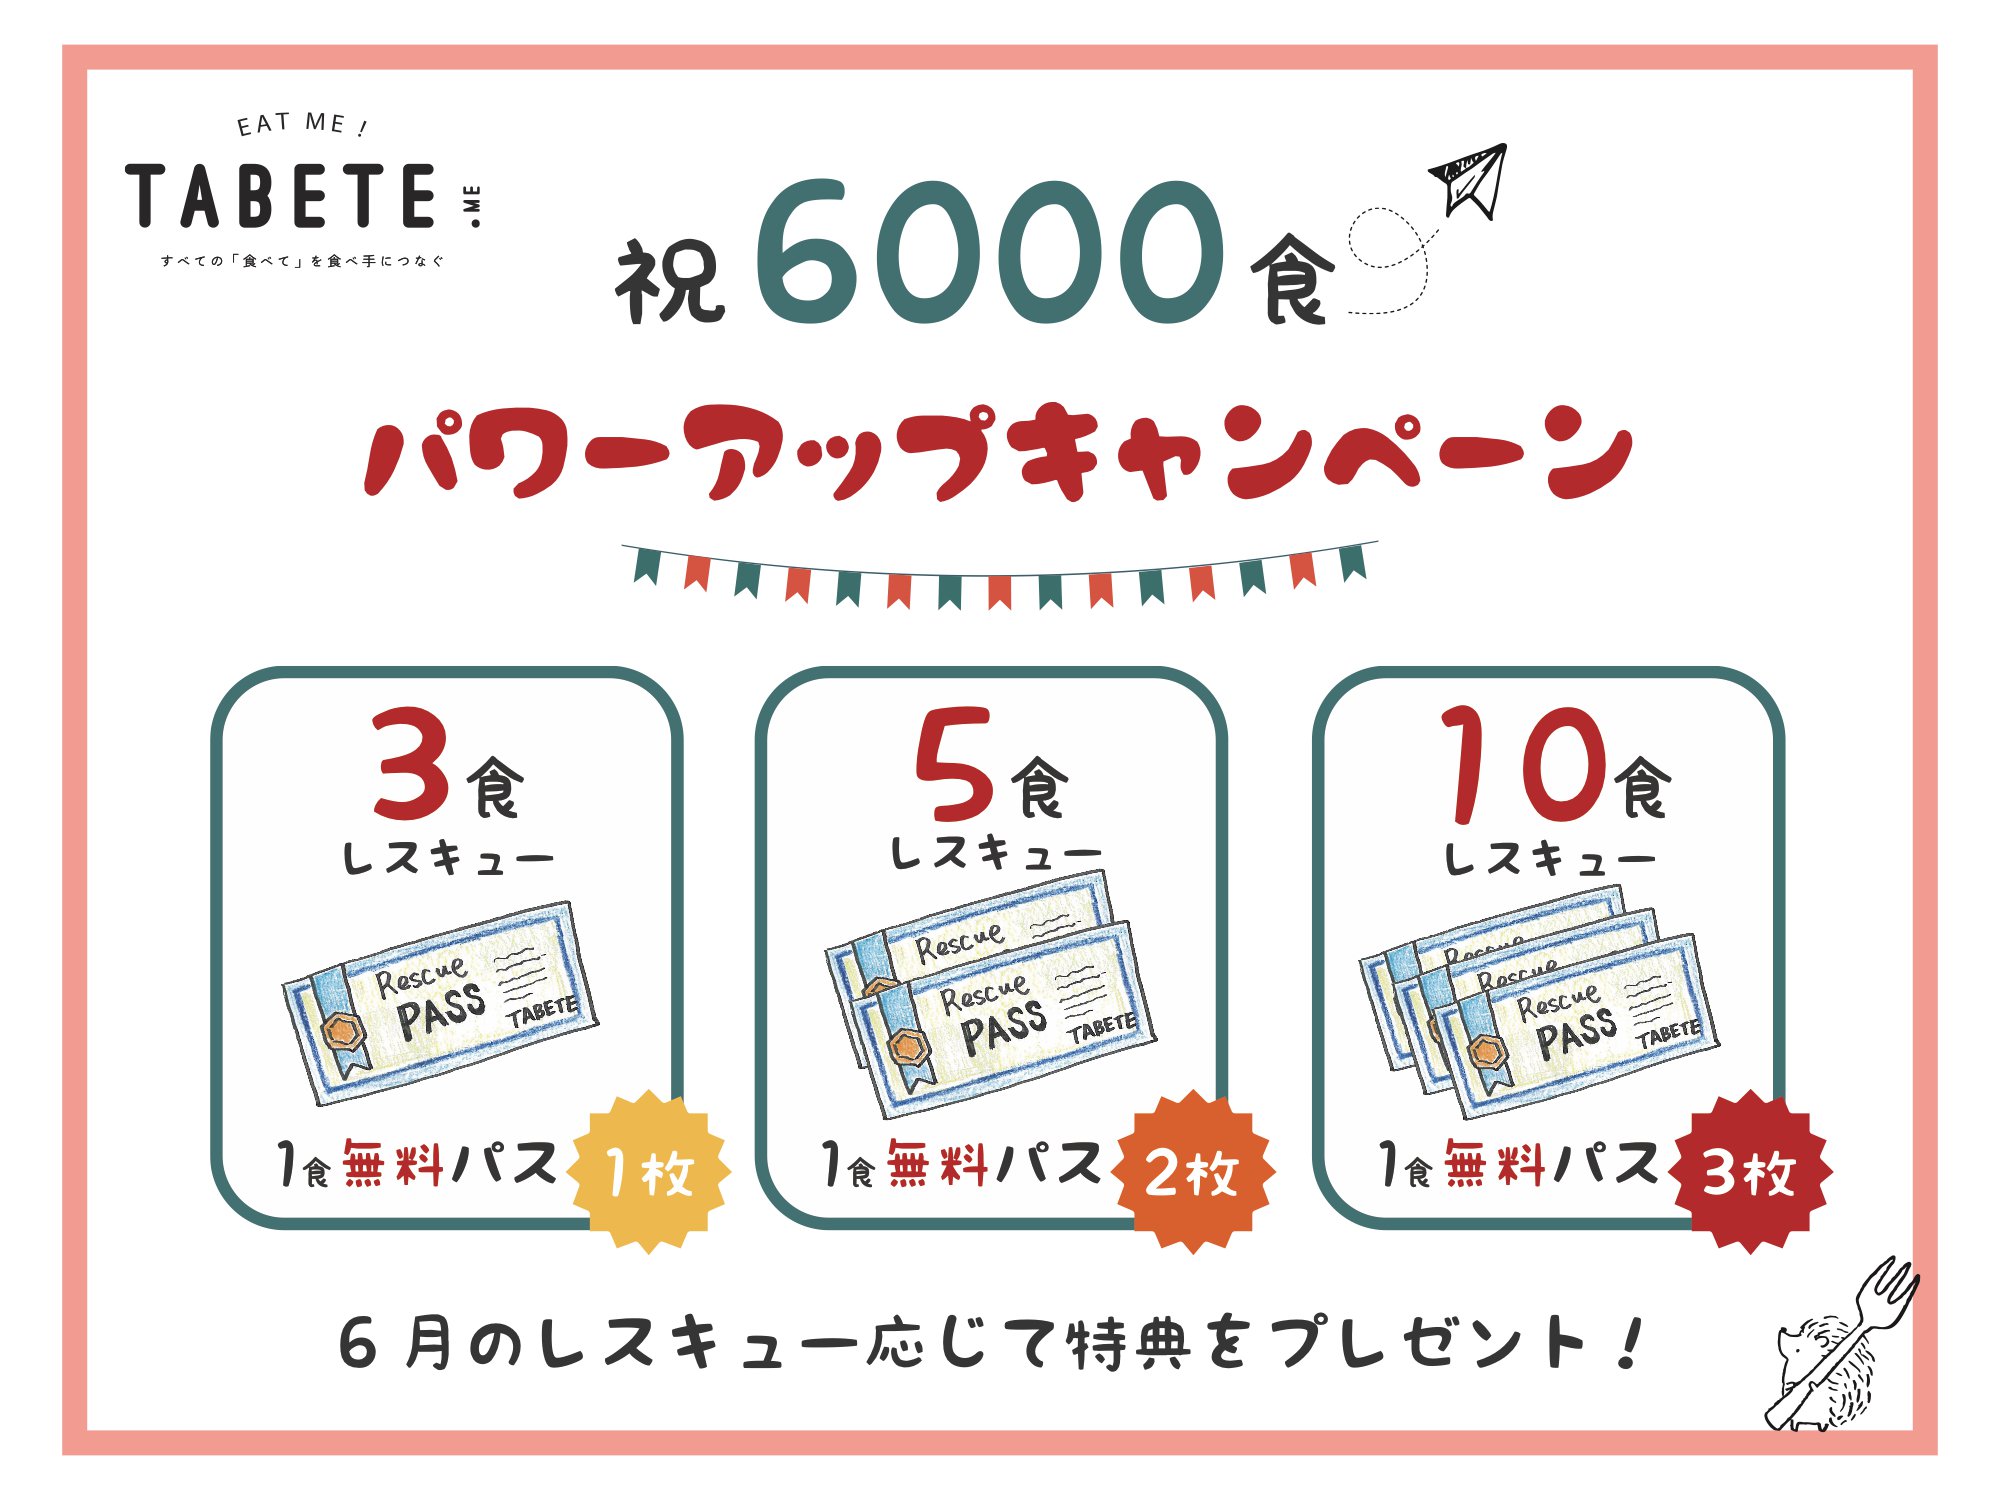 Fitness in Life the KIOSKでTABETEを導入いたしました！